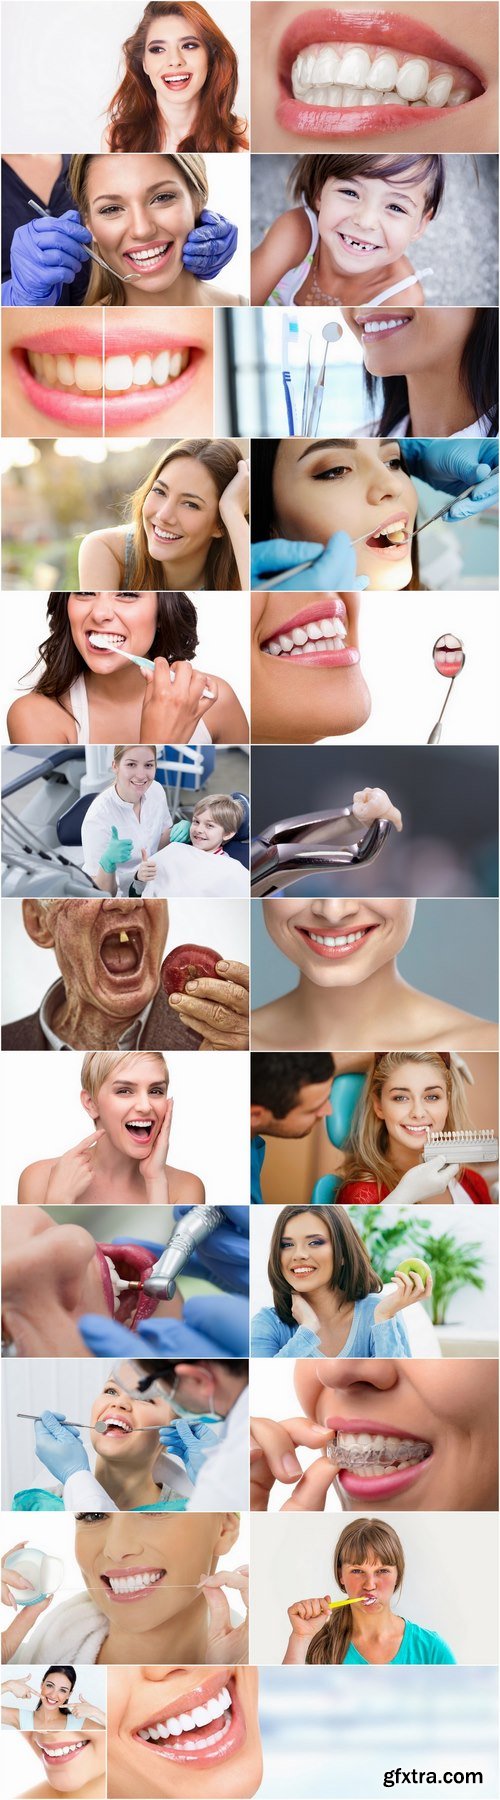 Tooth beautiful smile dentist mouth 25 HQ Jpeg